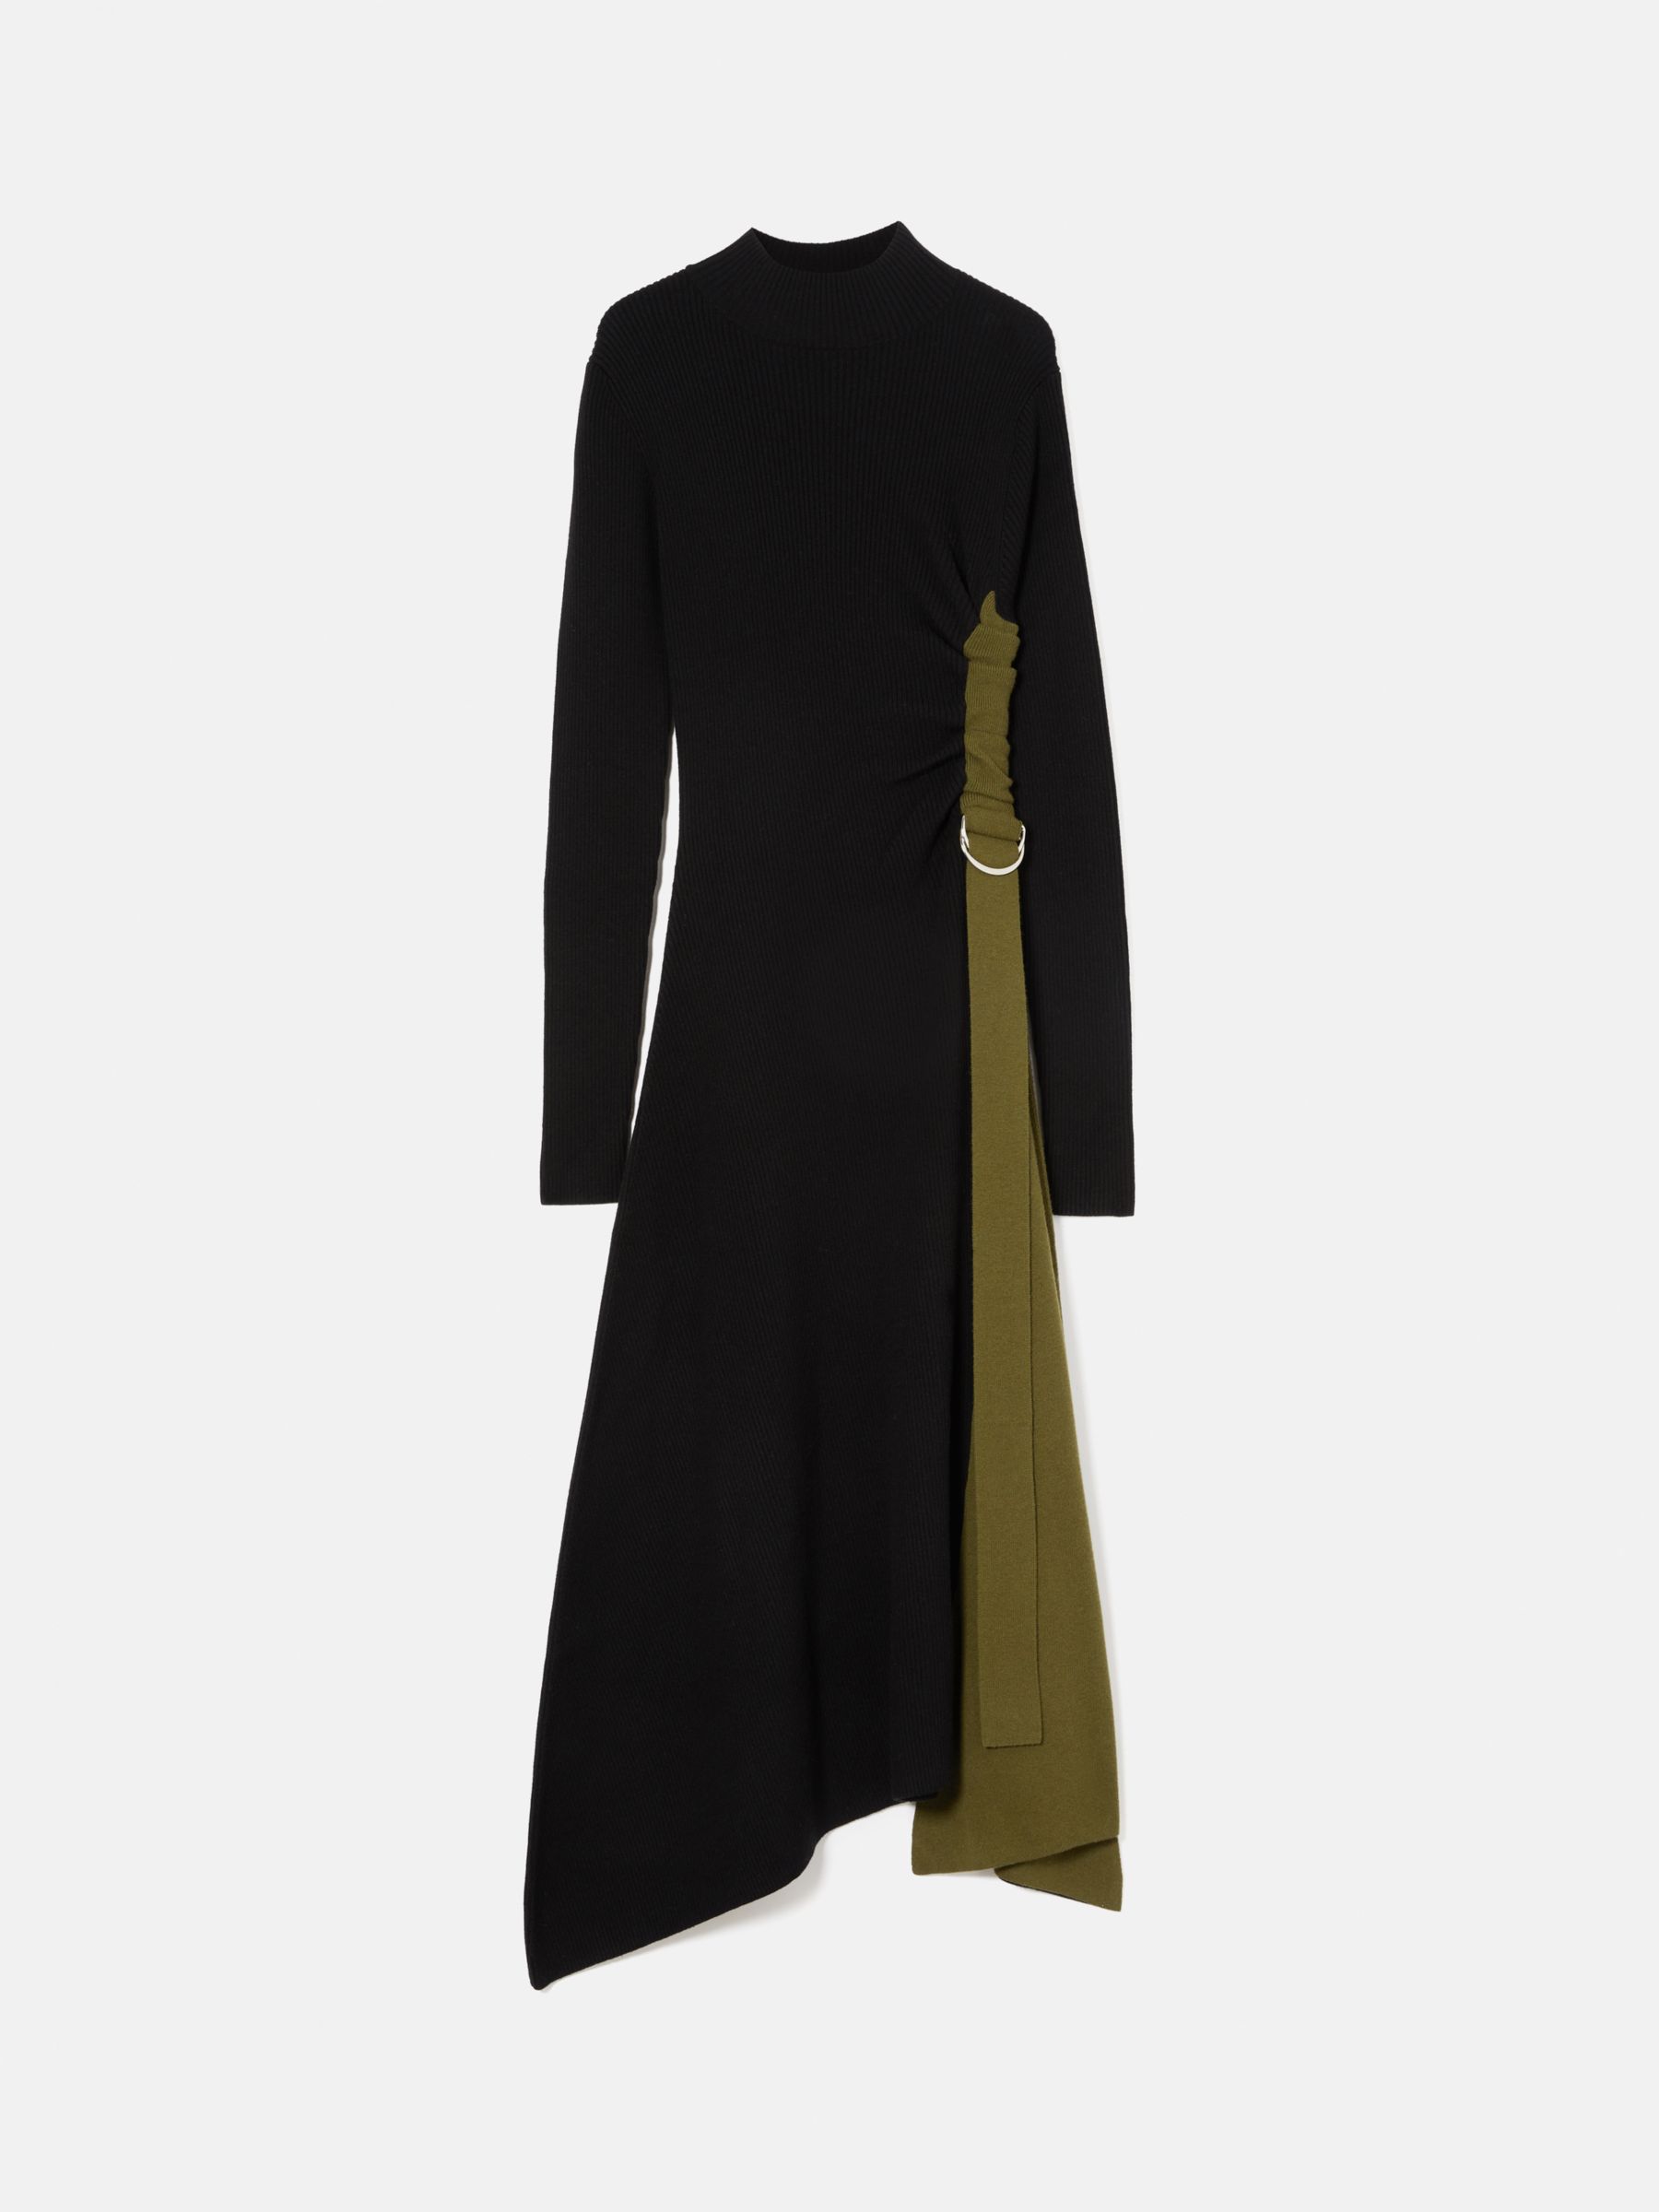 Jigsaw D-Ring Knitted Wool Blend Maxi Dress, Black/Olive at John Lewis ...